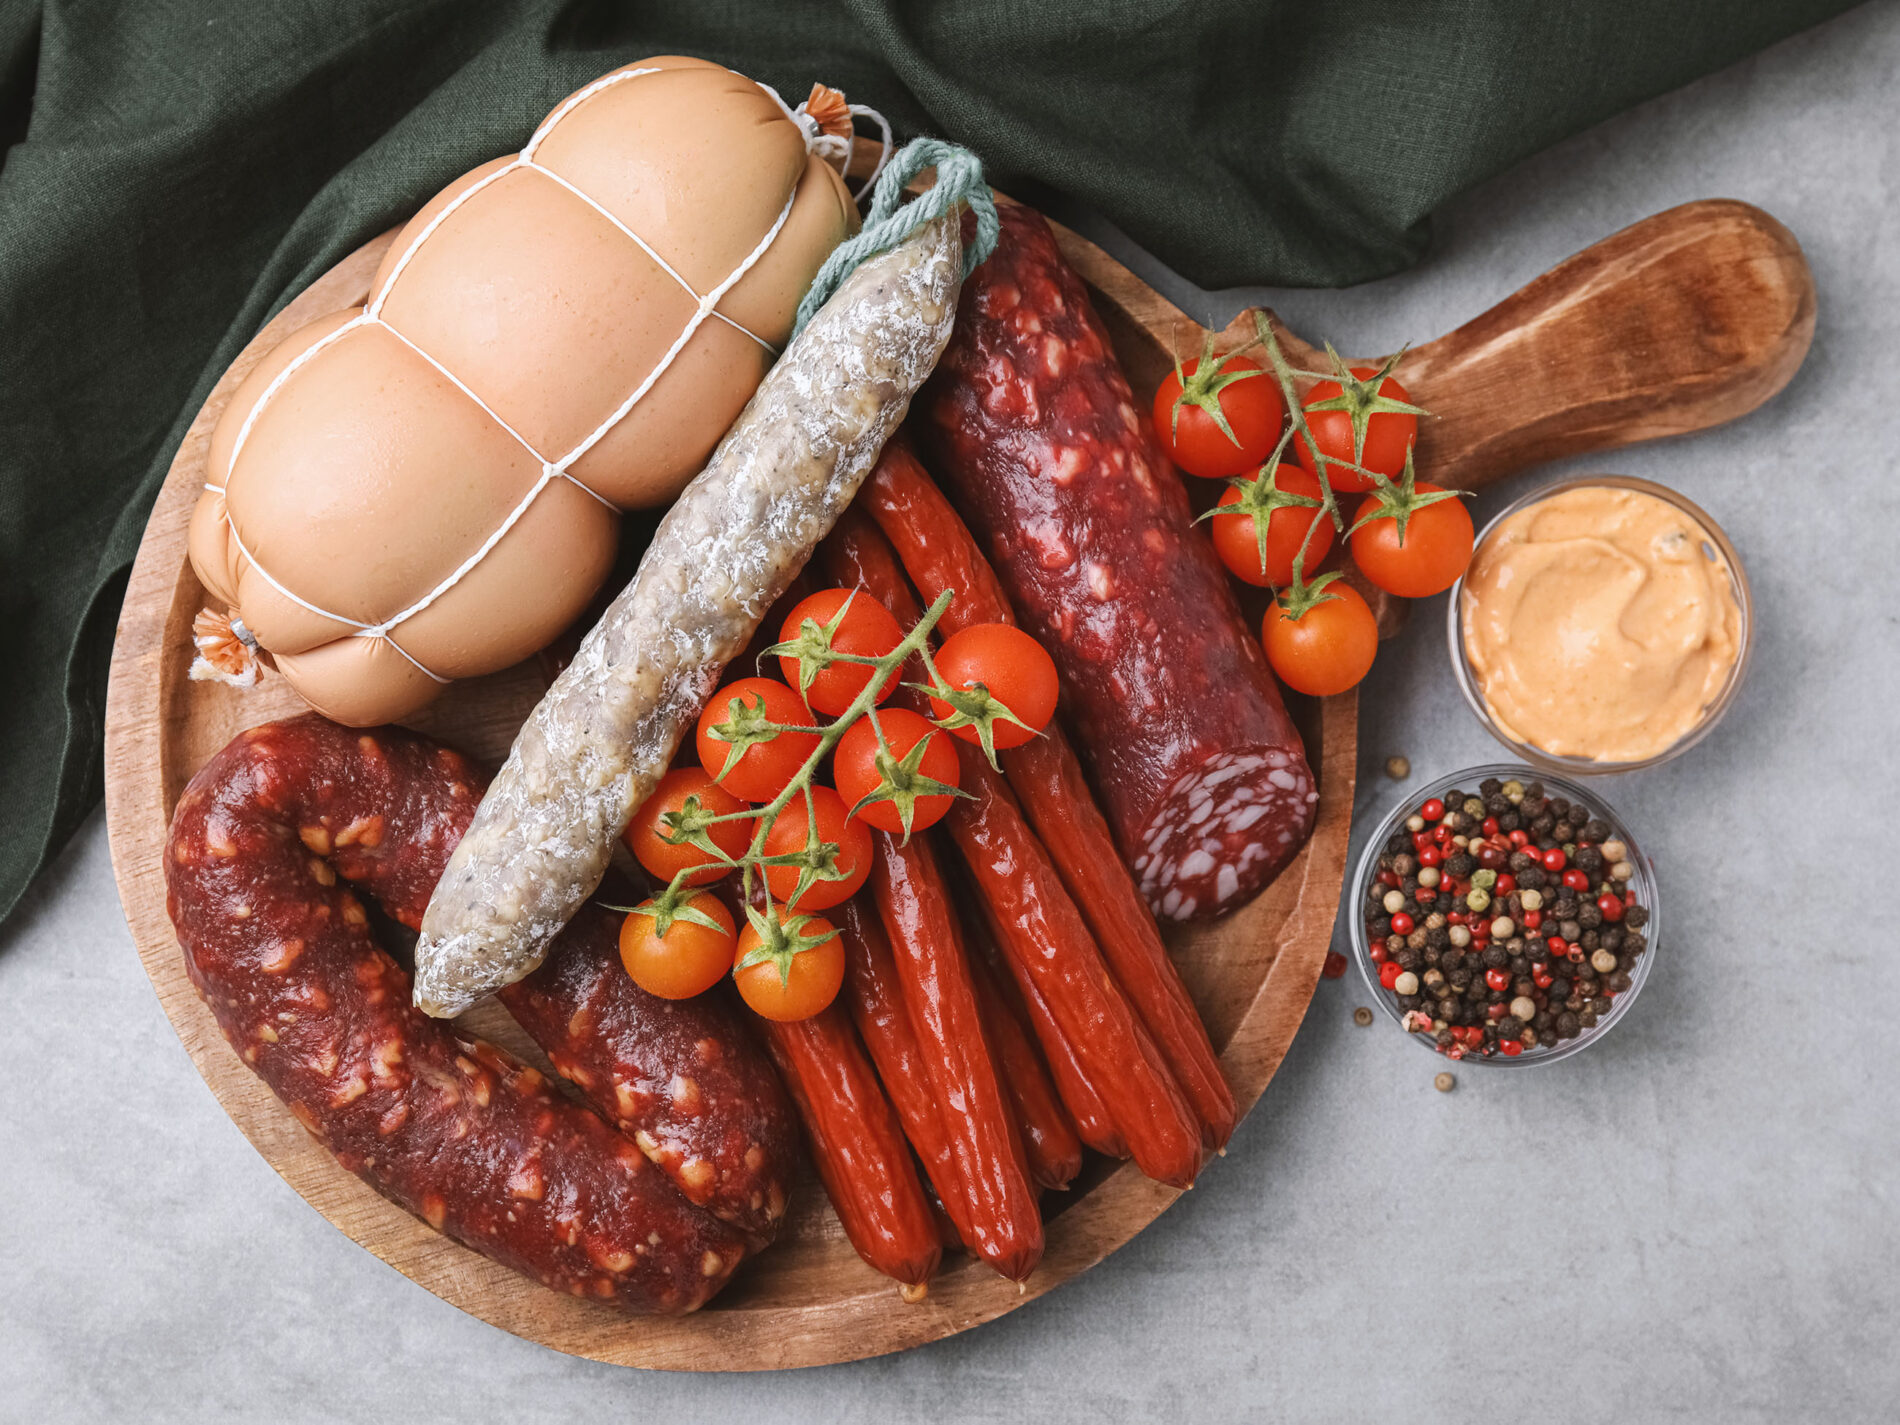 Different kinds of sausages on a wooden cutting board